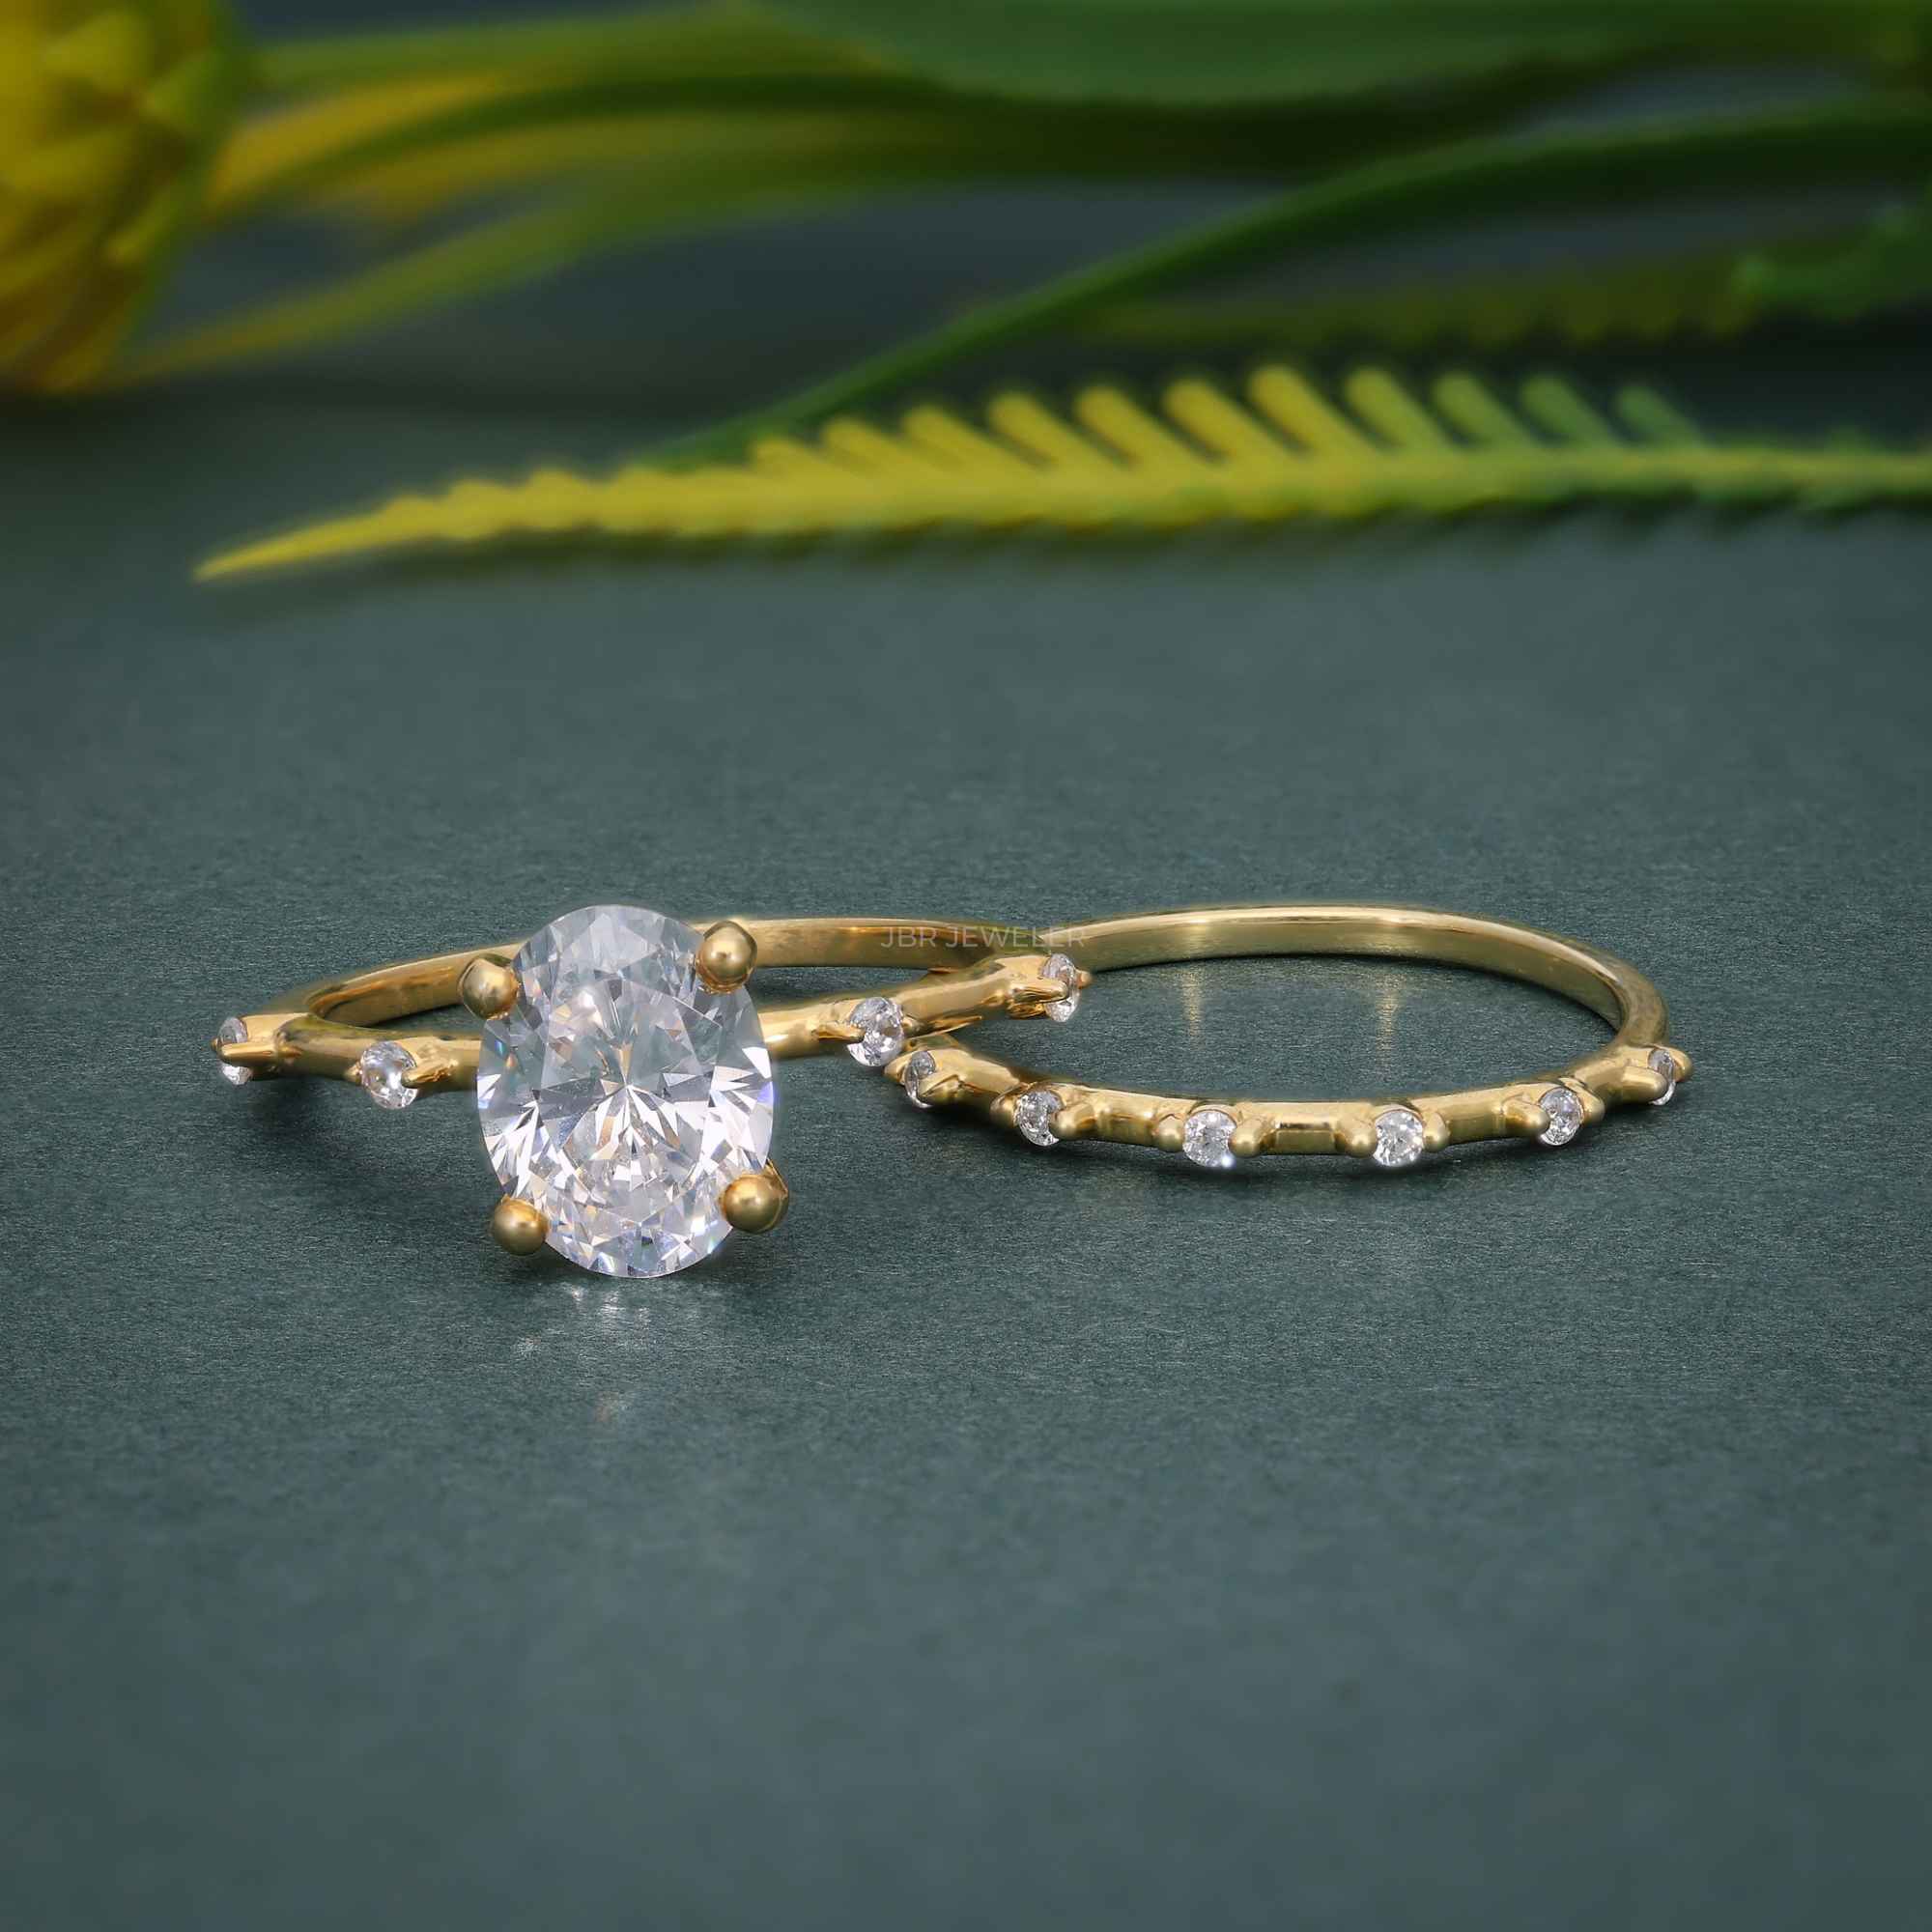 Oval Cut Moissanite Engagement Ring With Matching Bridal Ring Set